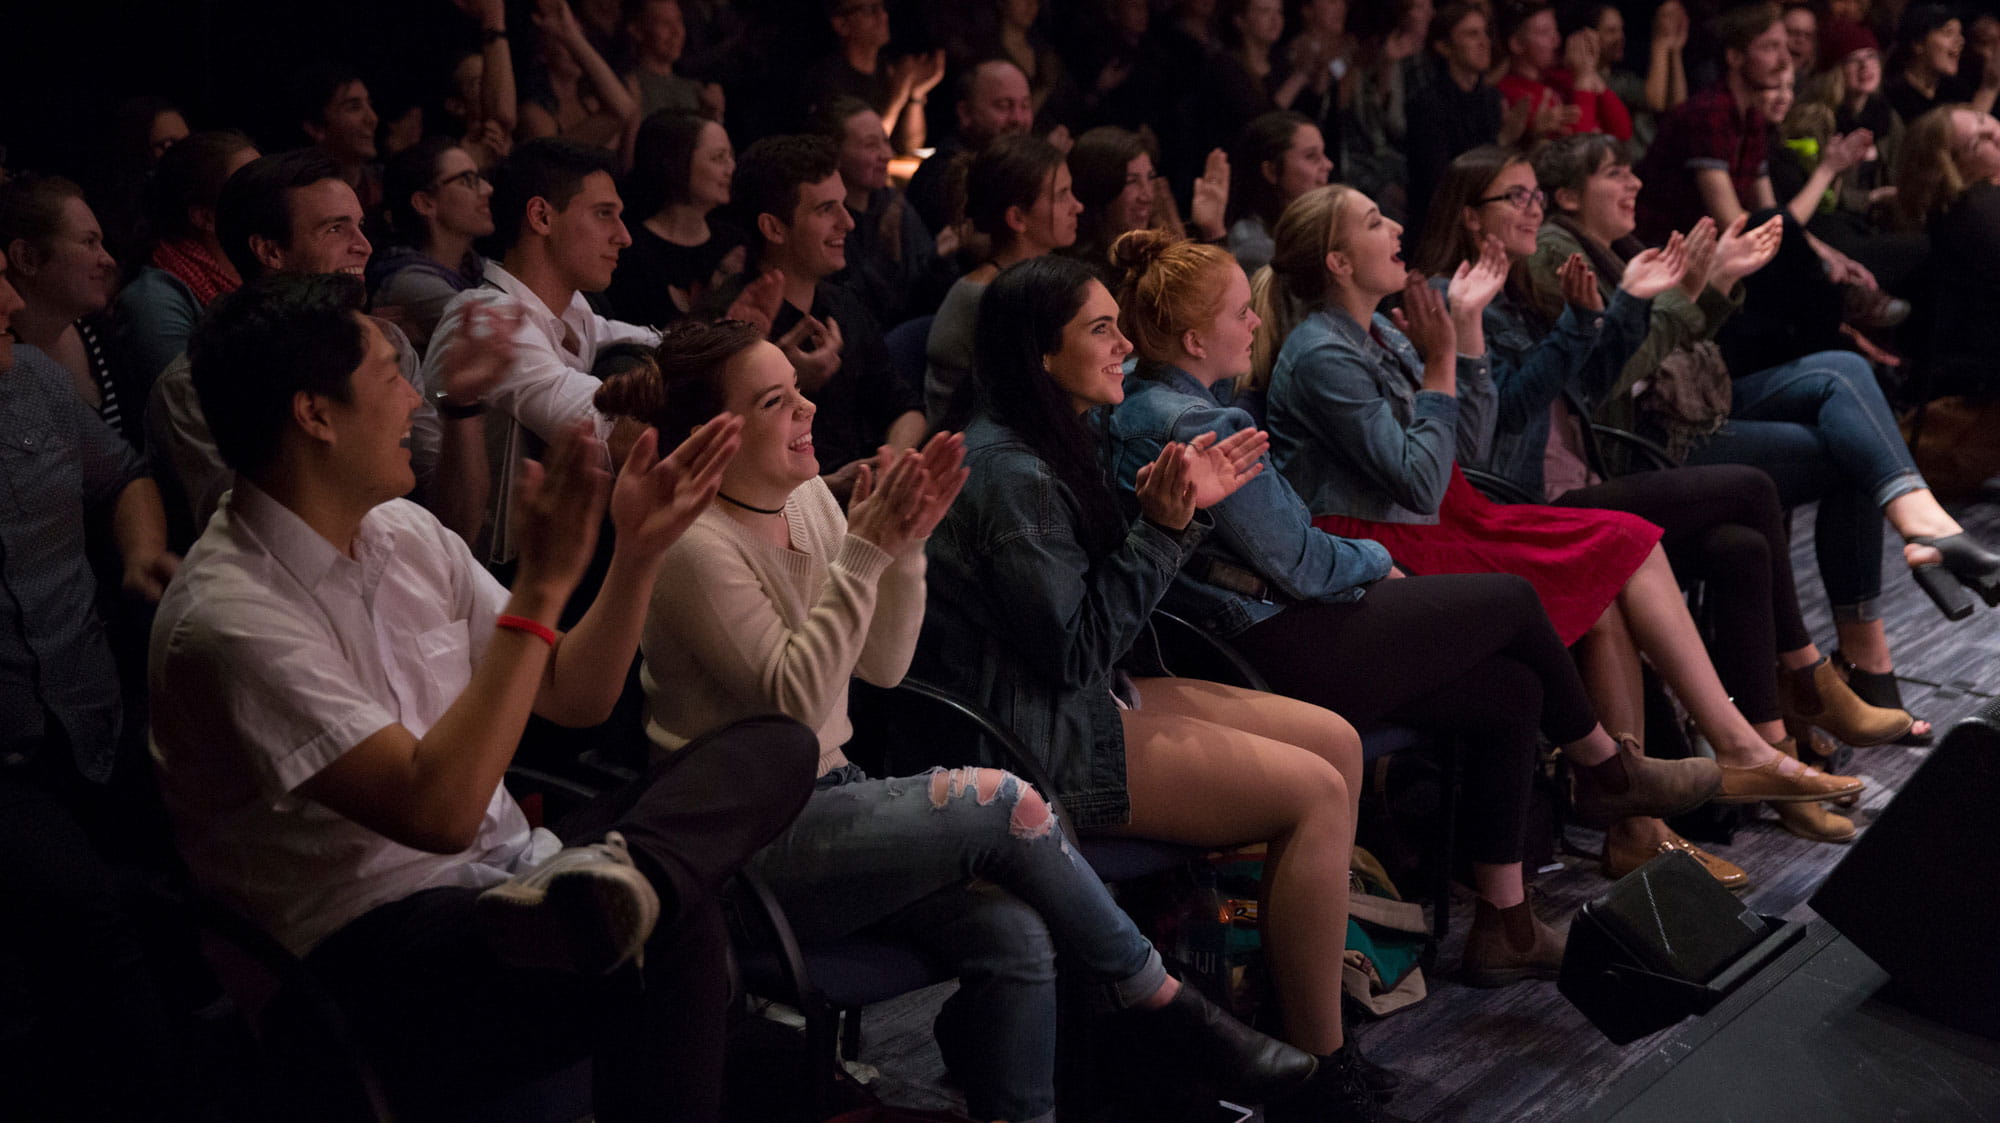 Theatre Sheridan audience applauding during a performance.